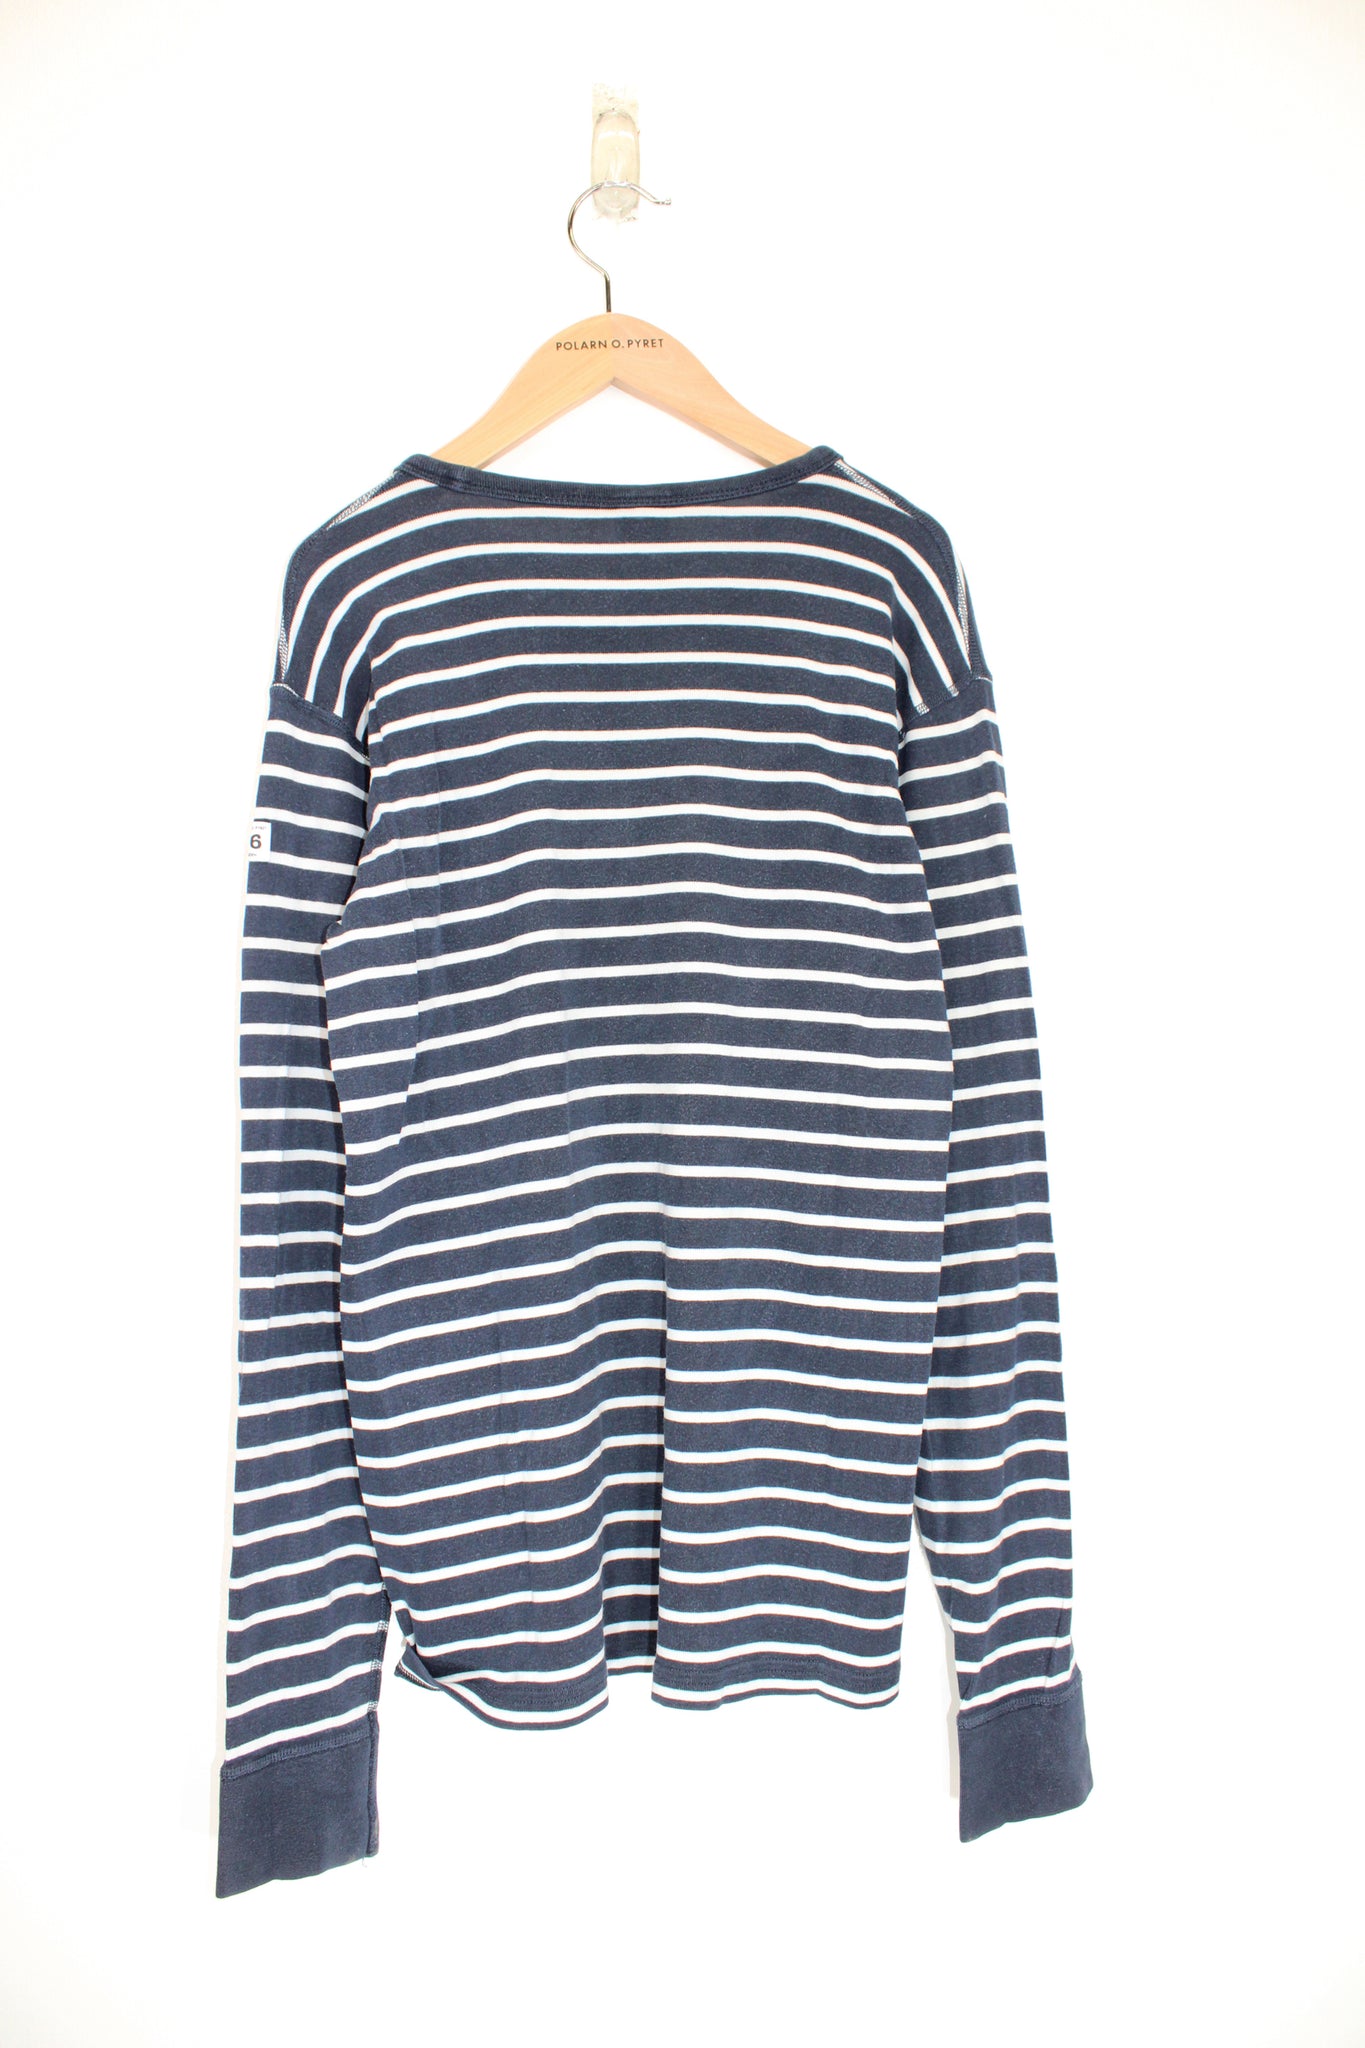 Adult Long Sleeved Top S / S